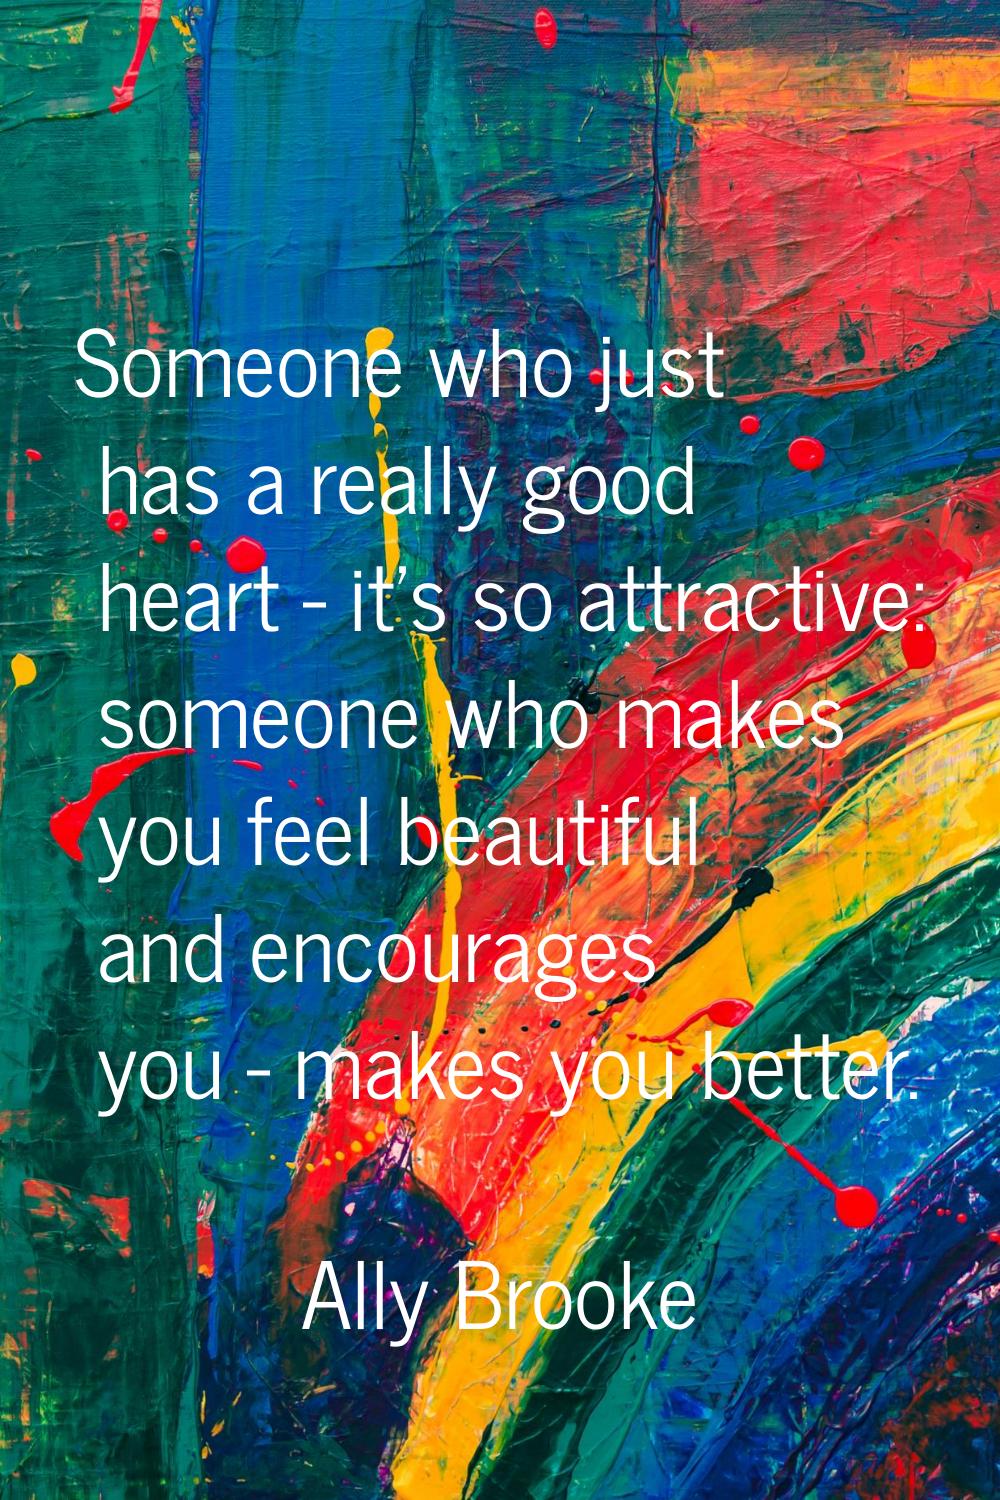 Someone who just has a really good heart - it's so attractive: someone who makes you feel beautiful